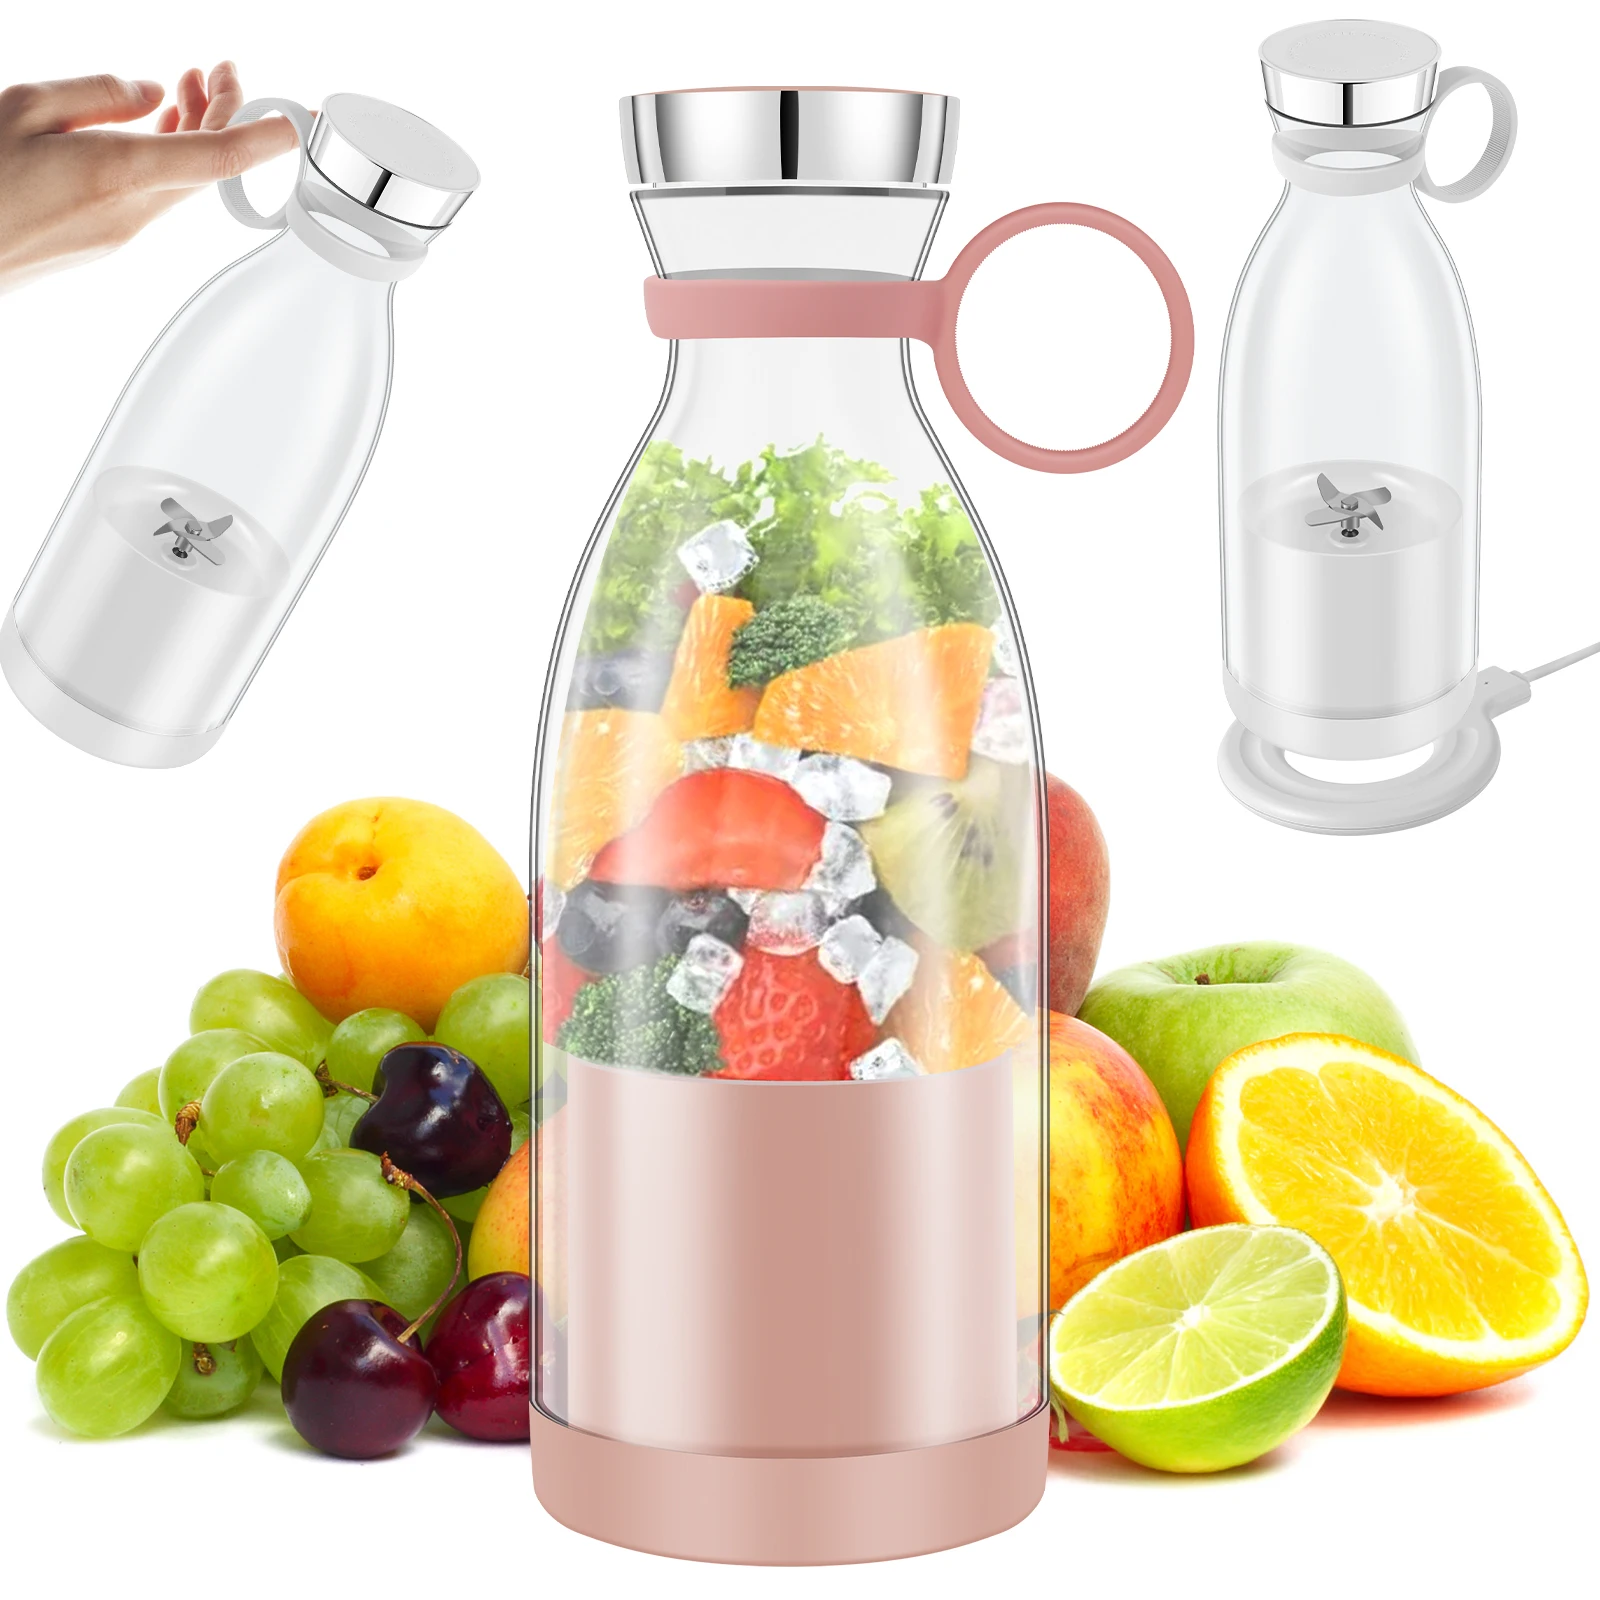 

Mini Blender Portable Blender 1400mAh USB Rechargeable Electric Fruit Juicer Mixer Cup Travel Electric Smoothie Blender Personal